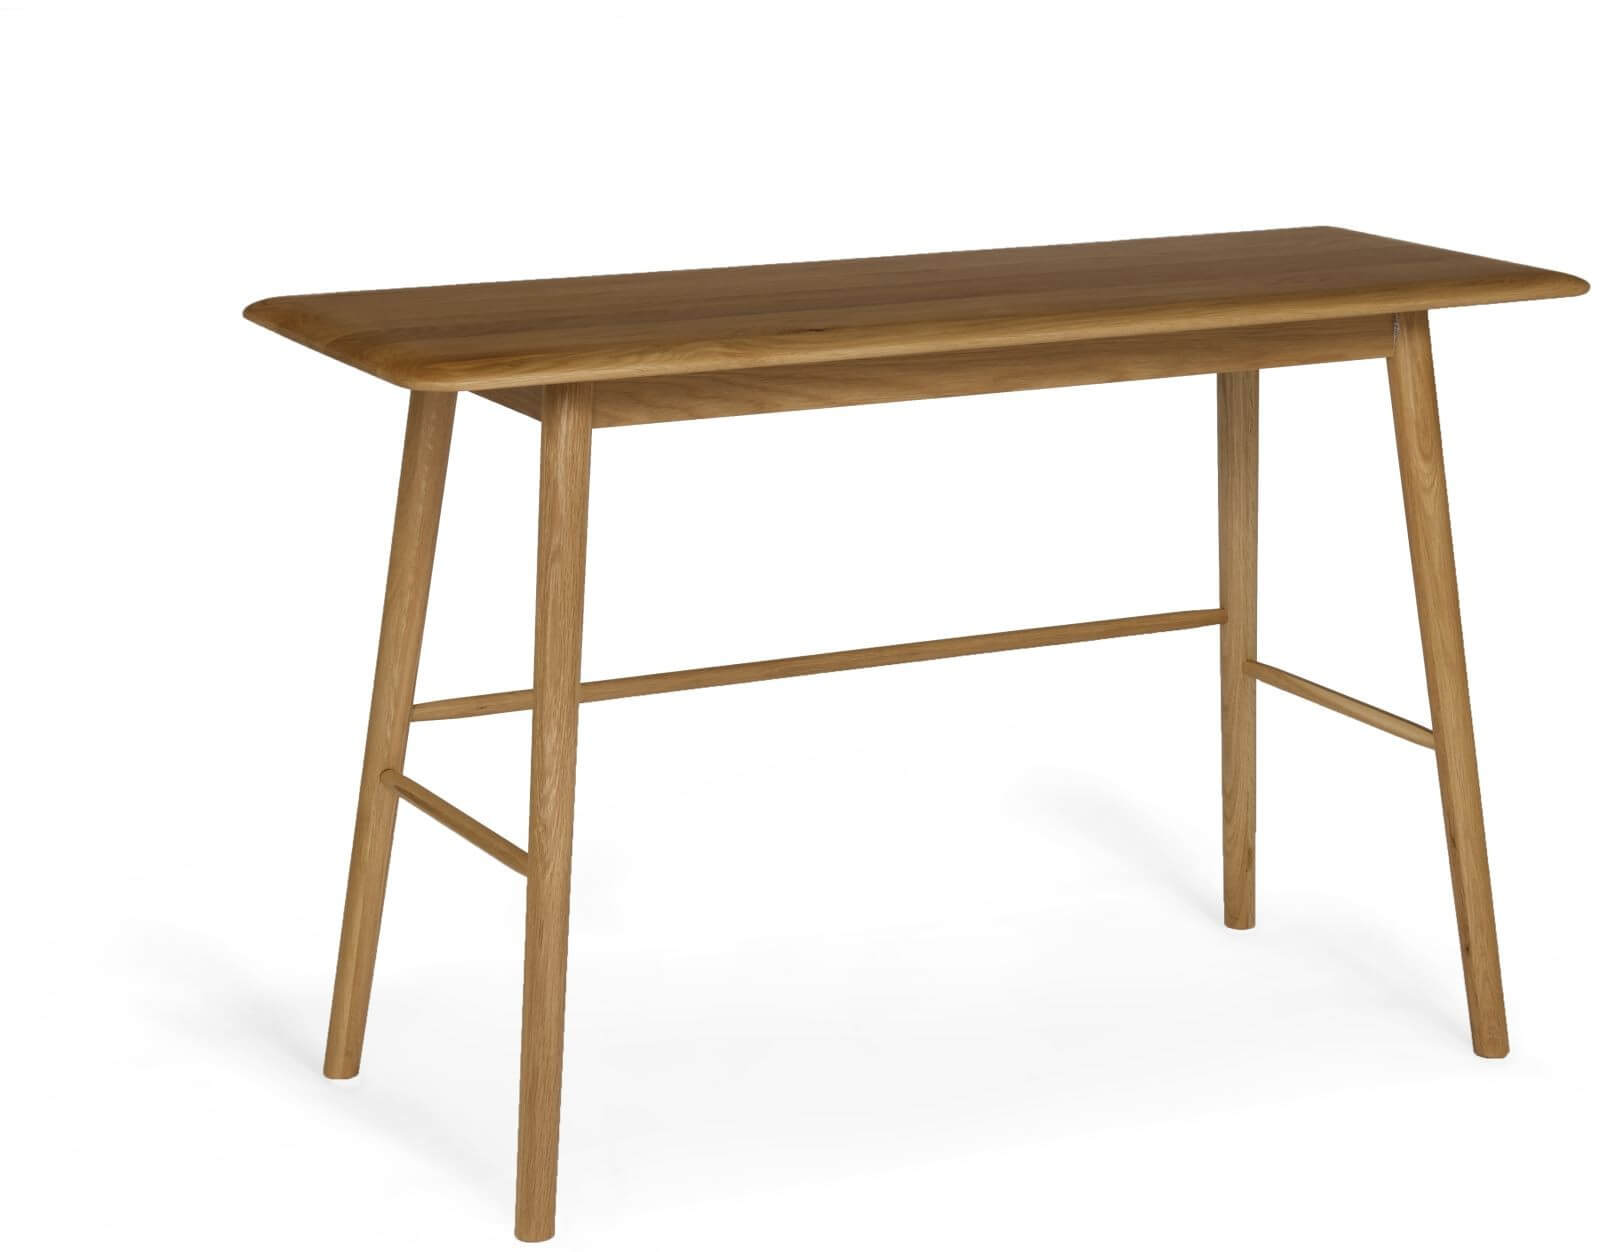 Showing image for Bergen console table